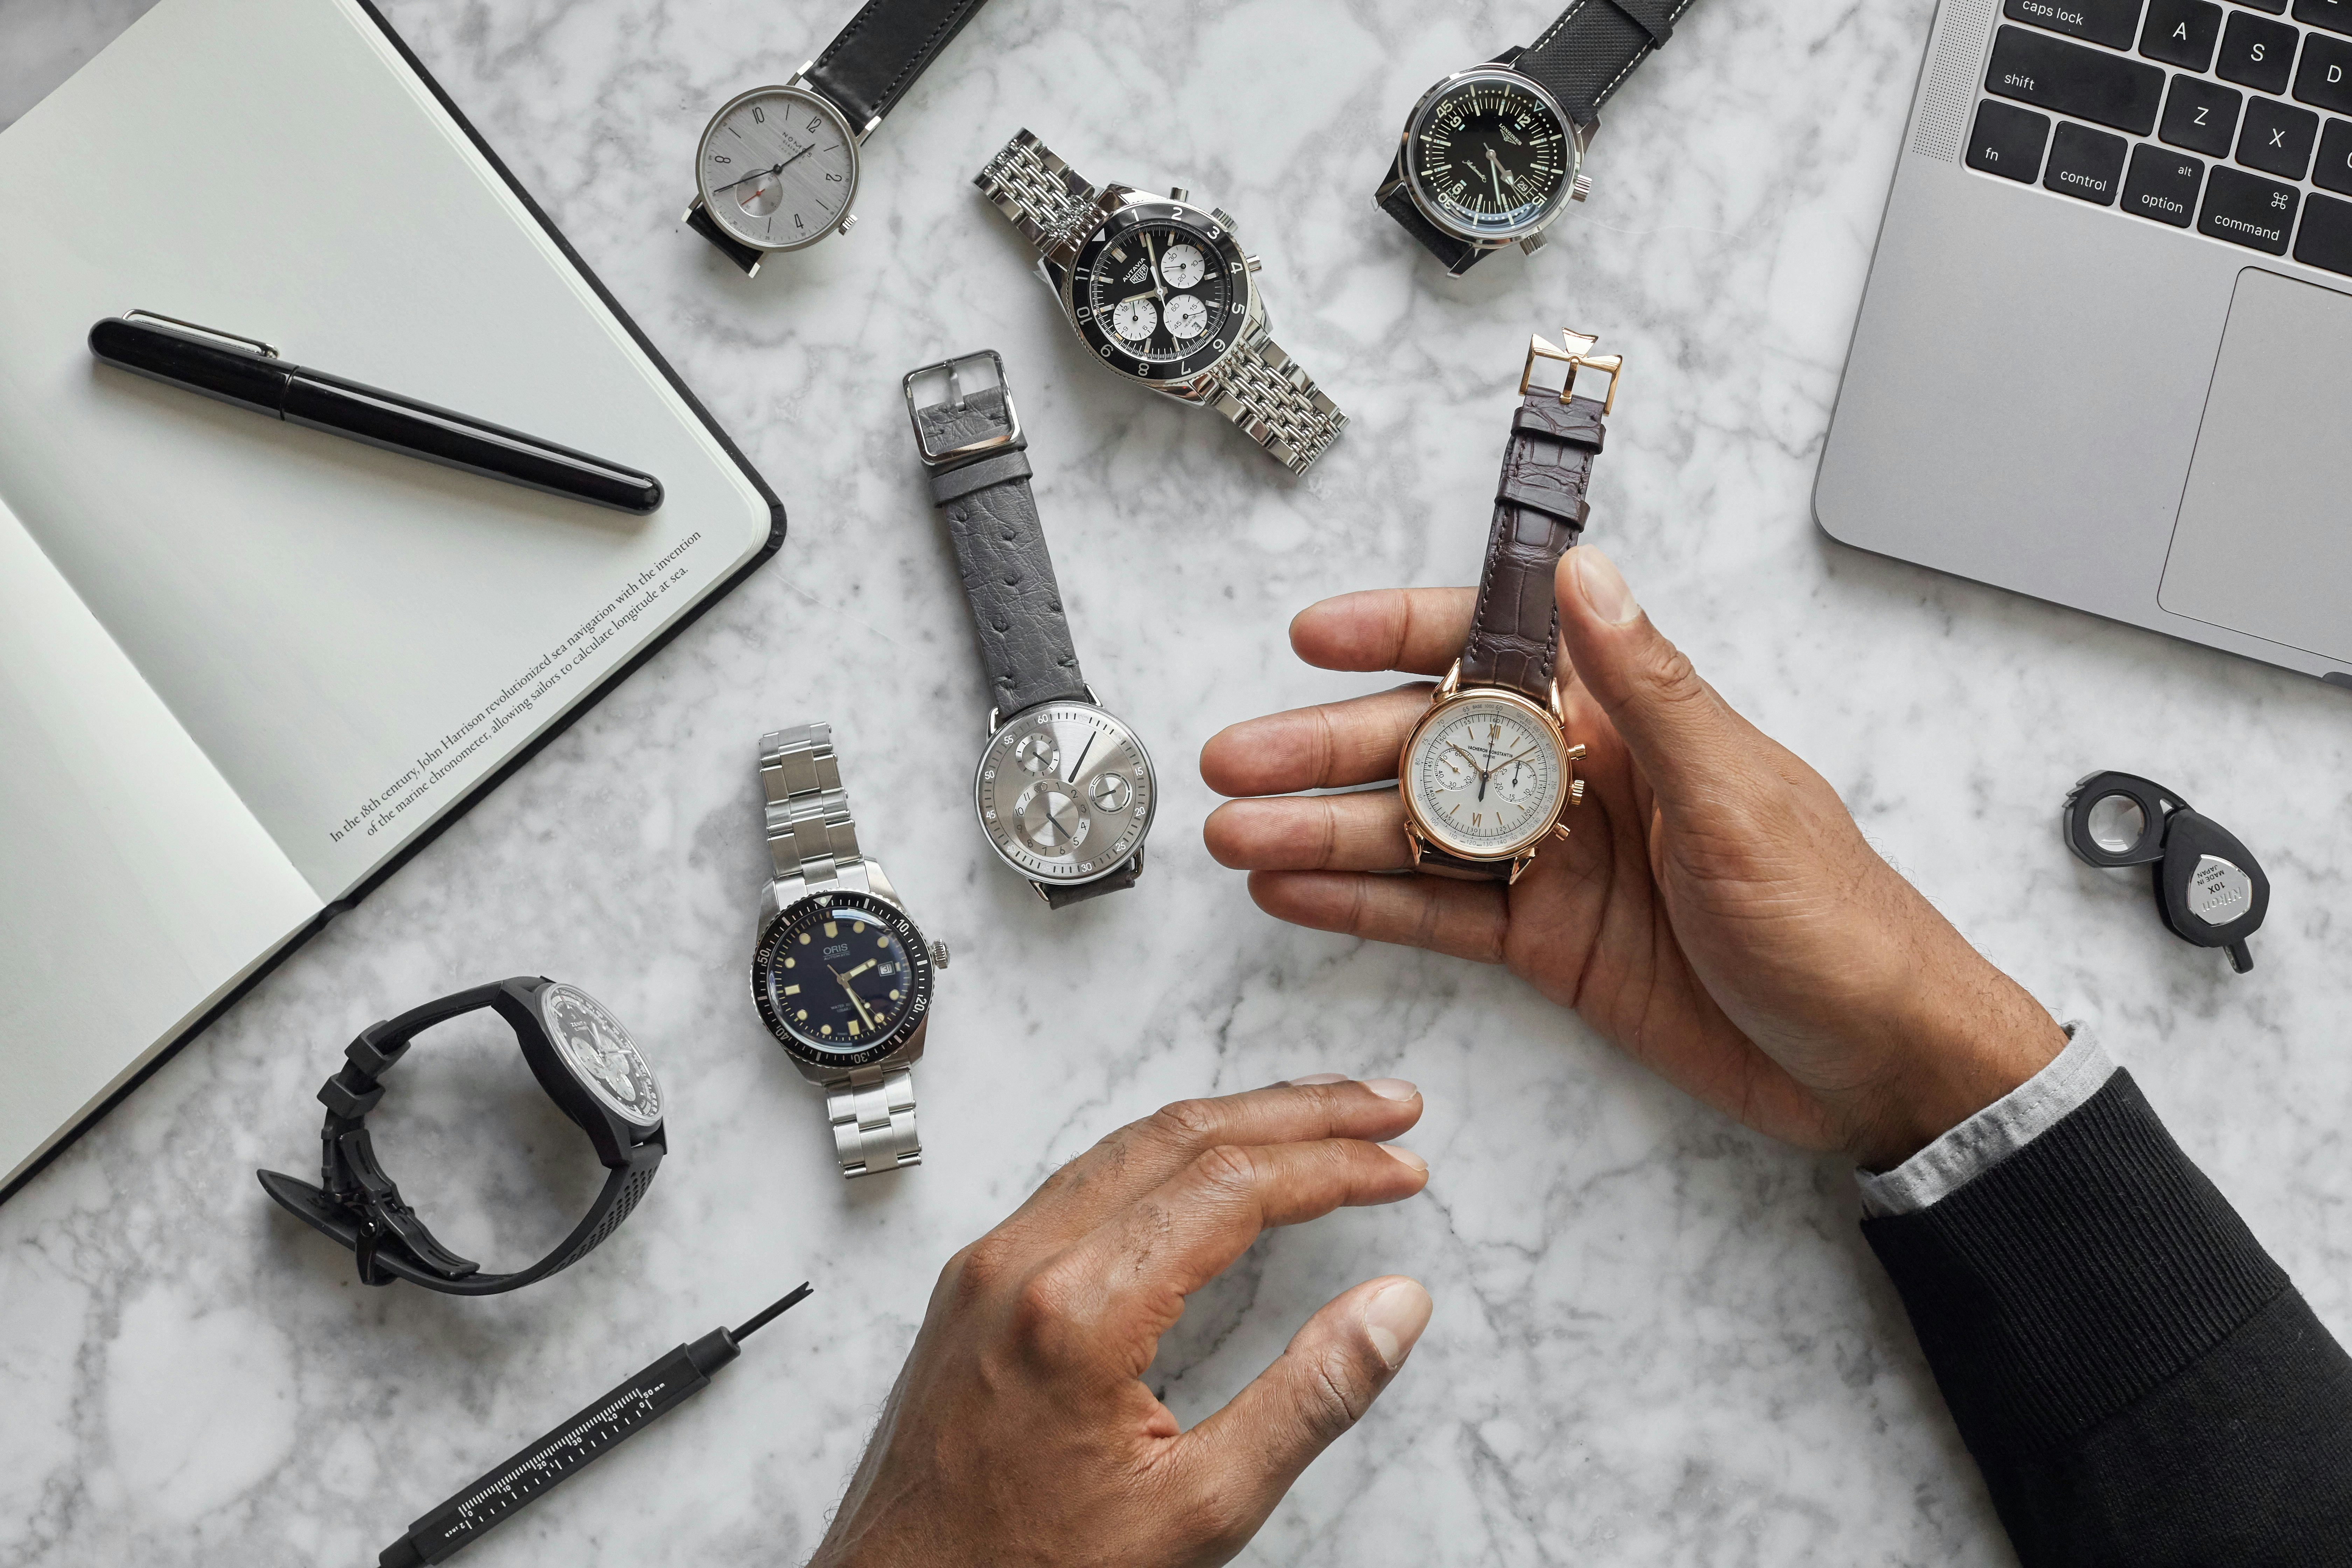 Hodinkee, online watch retailer backed by LVMH, slashes 20% staff